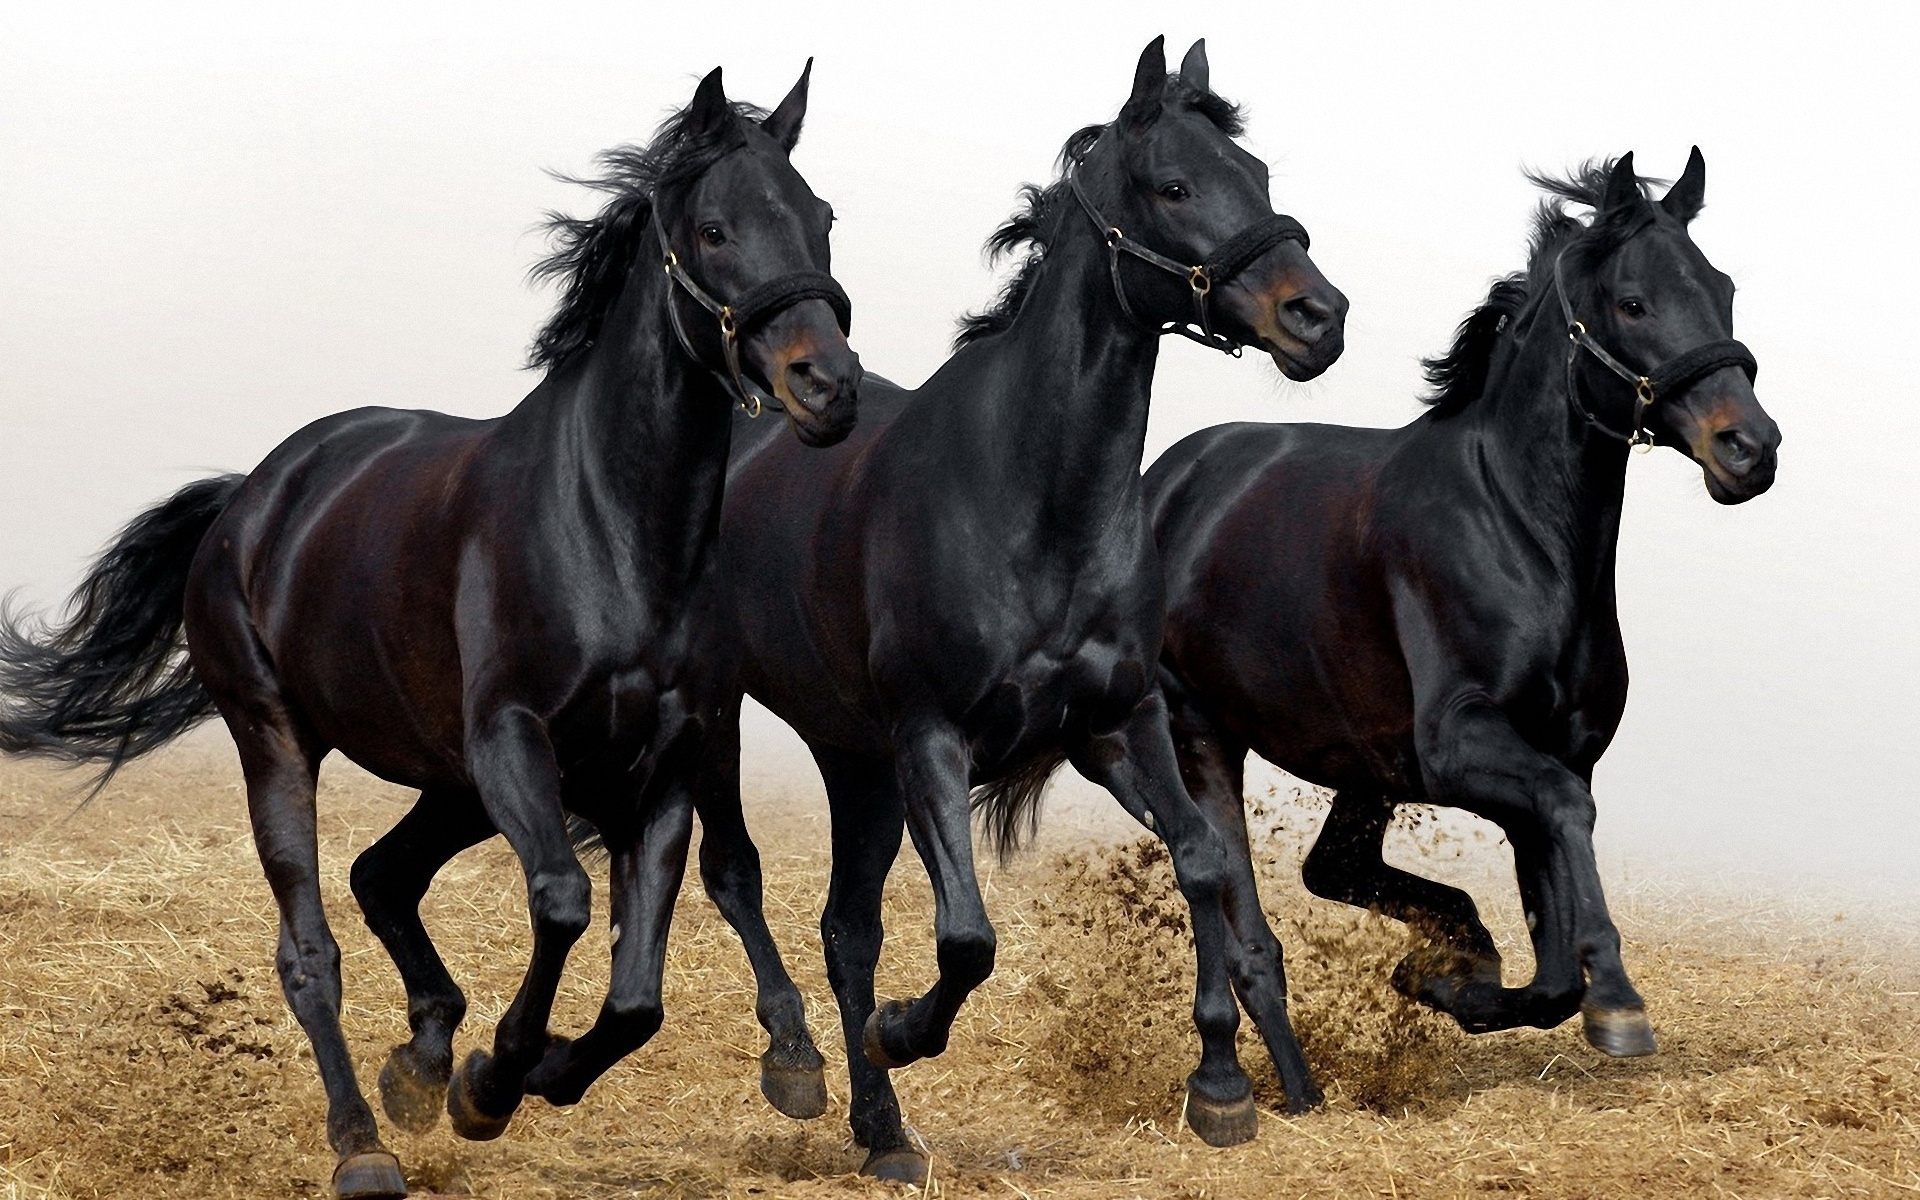 39348 download wallpaper horses, animals screensavers and pictures for free